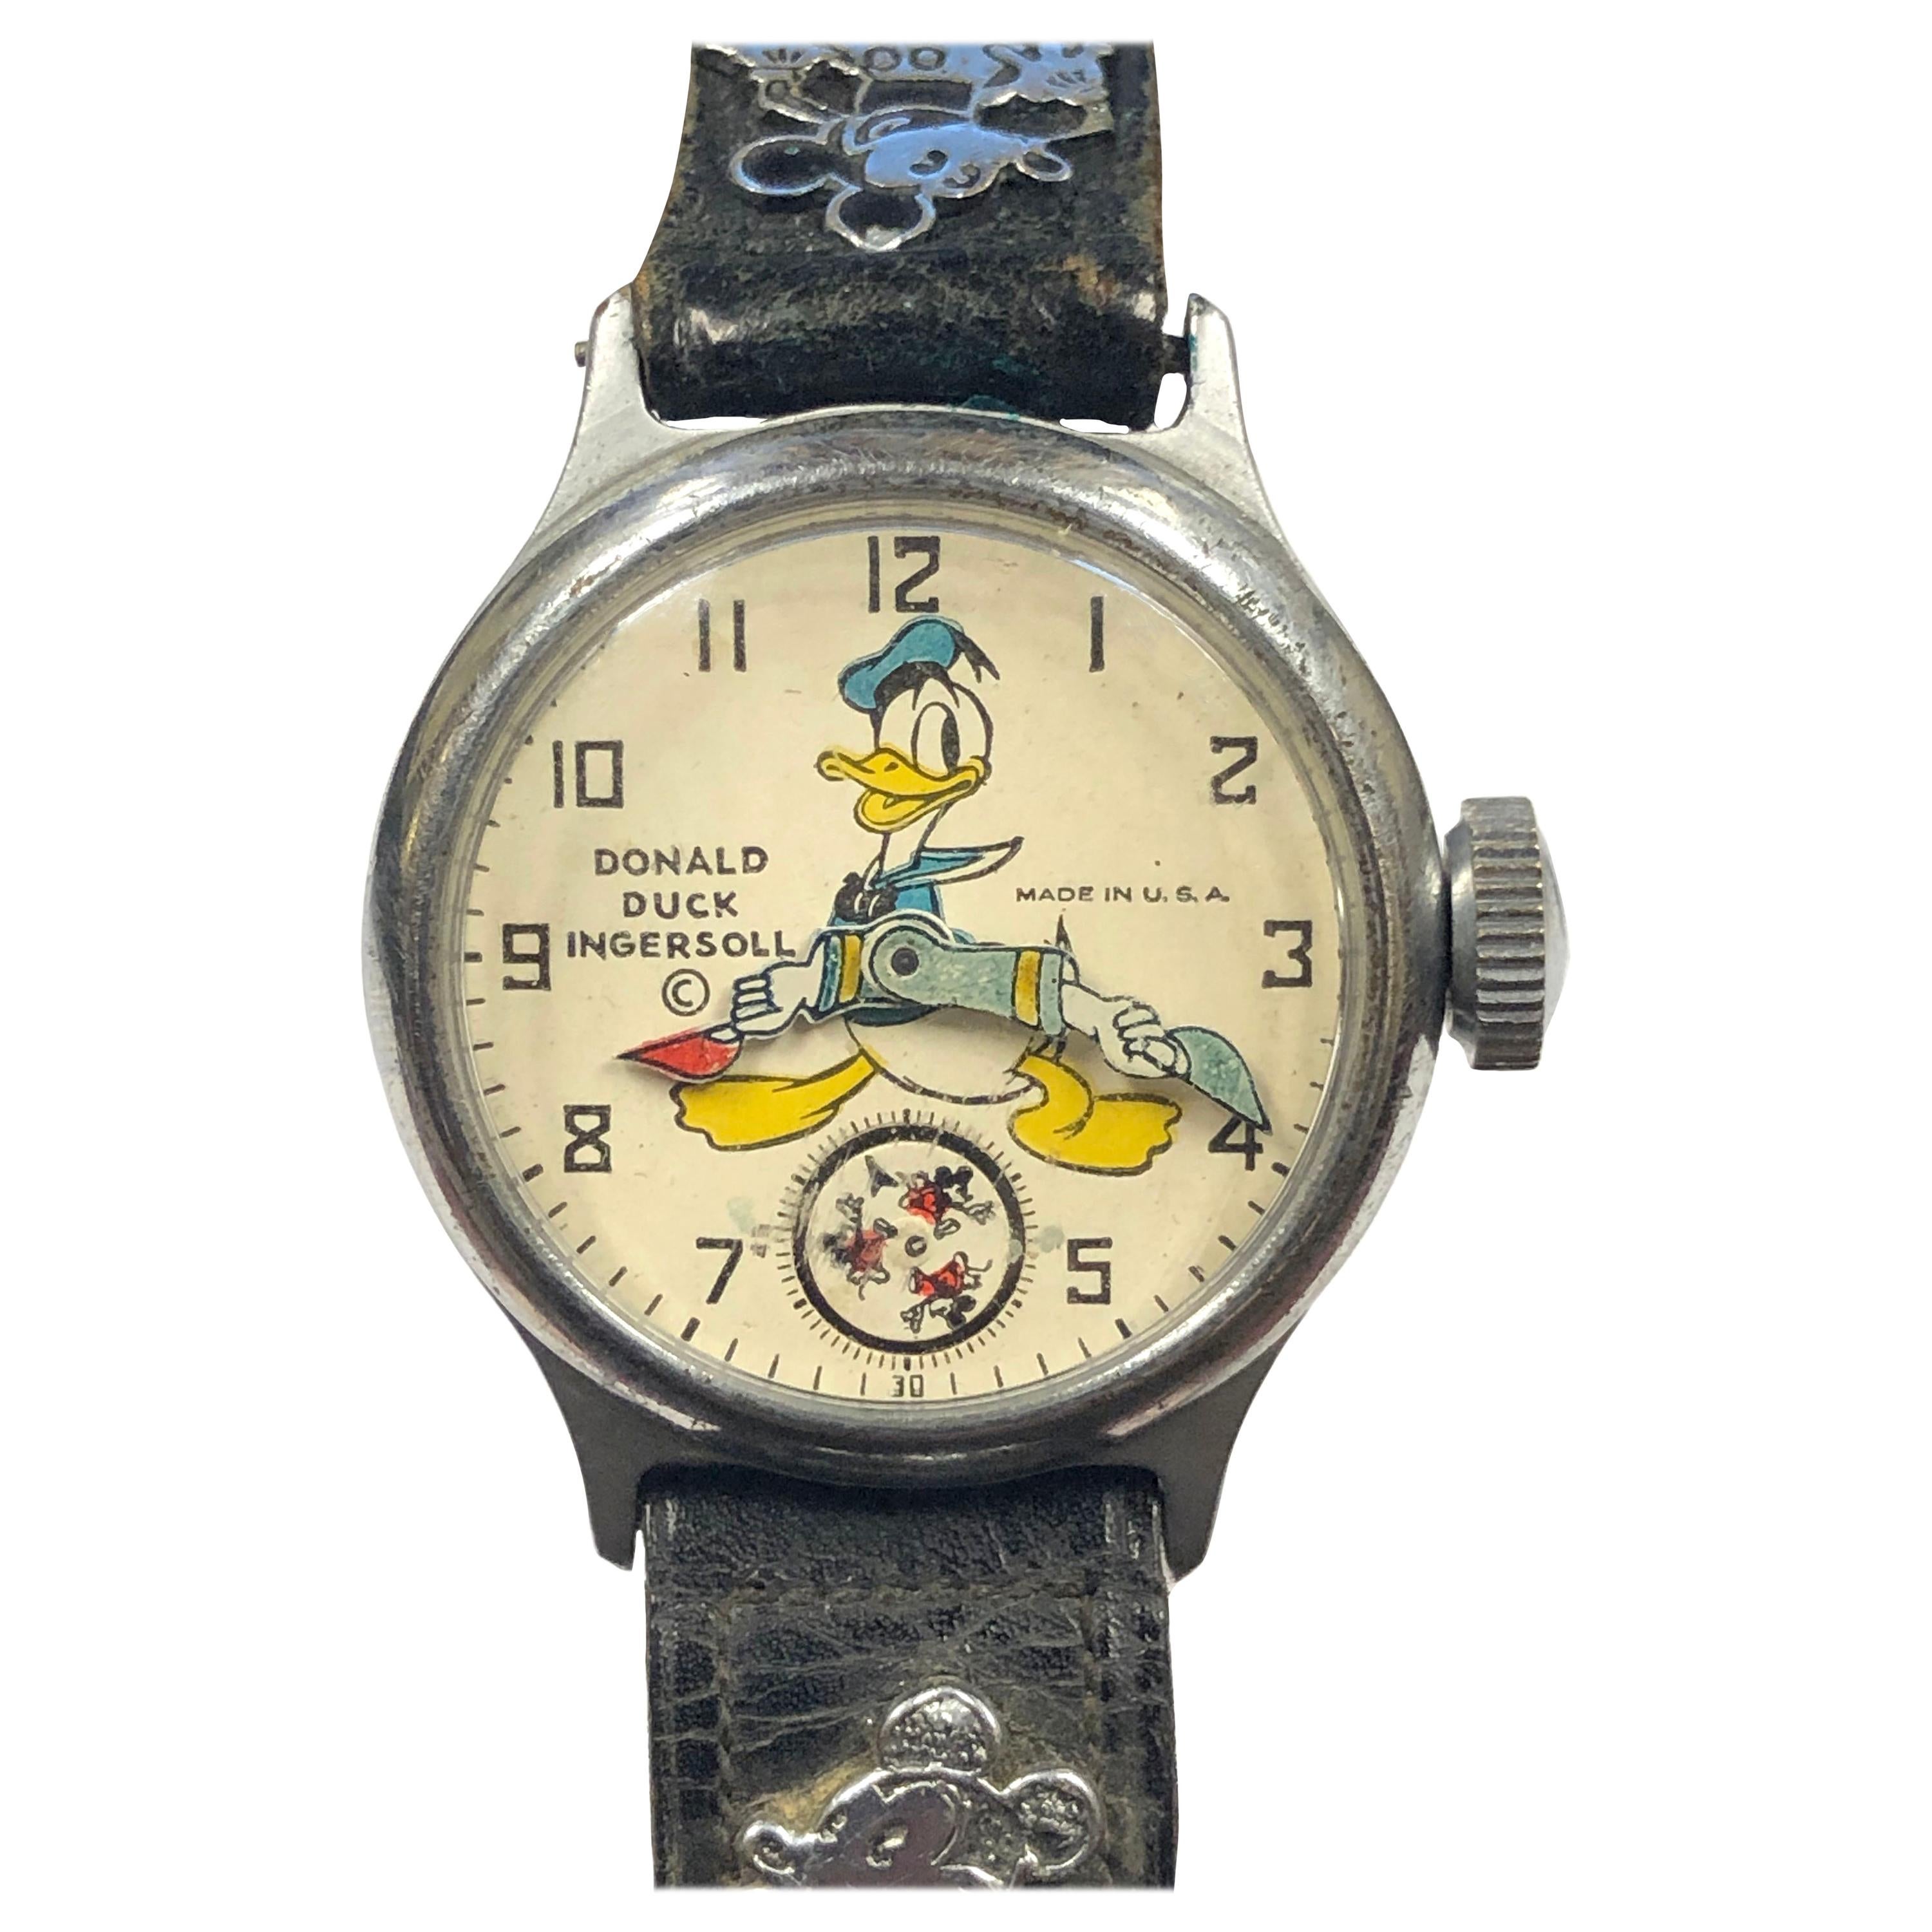 Donald Duck Watch - For Sale on 1stDibs | donald duck watches, donald duck  watch vintage, donald duck wrist watch